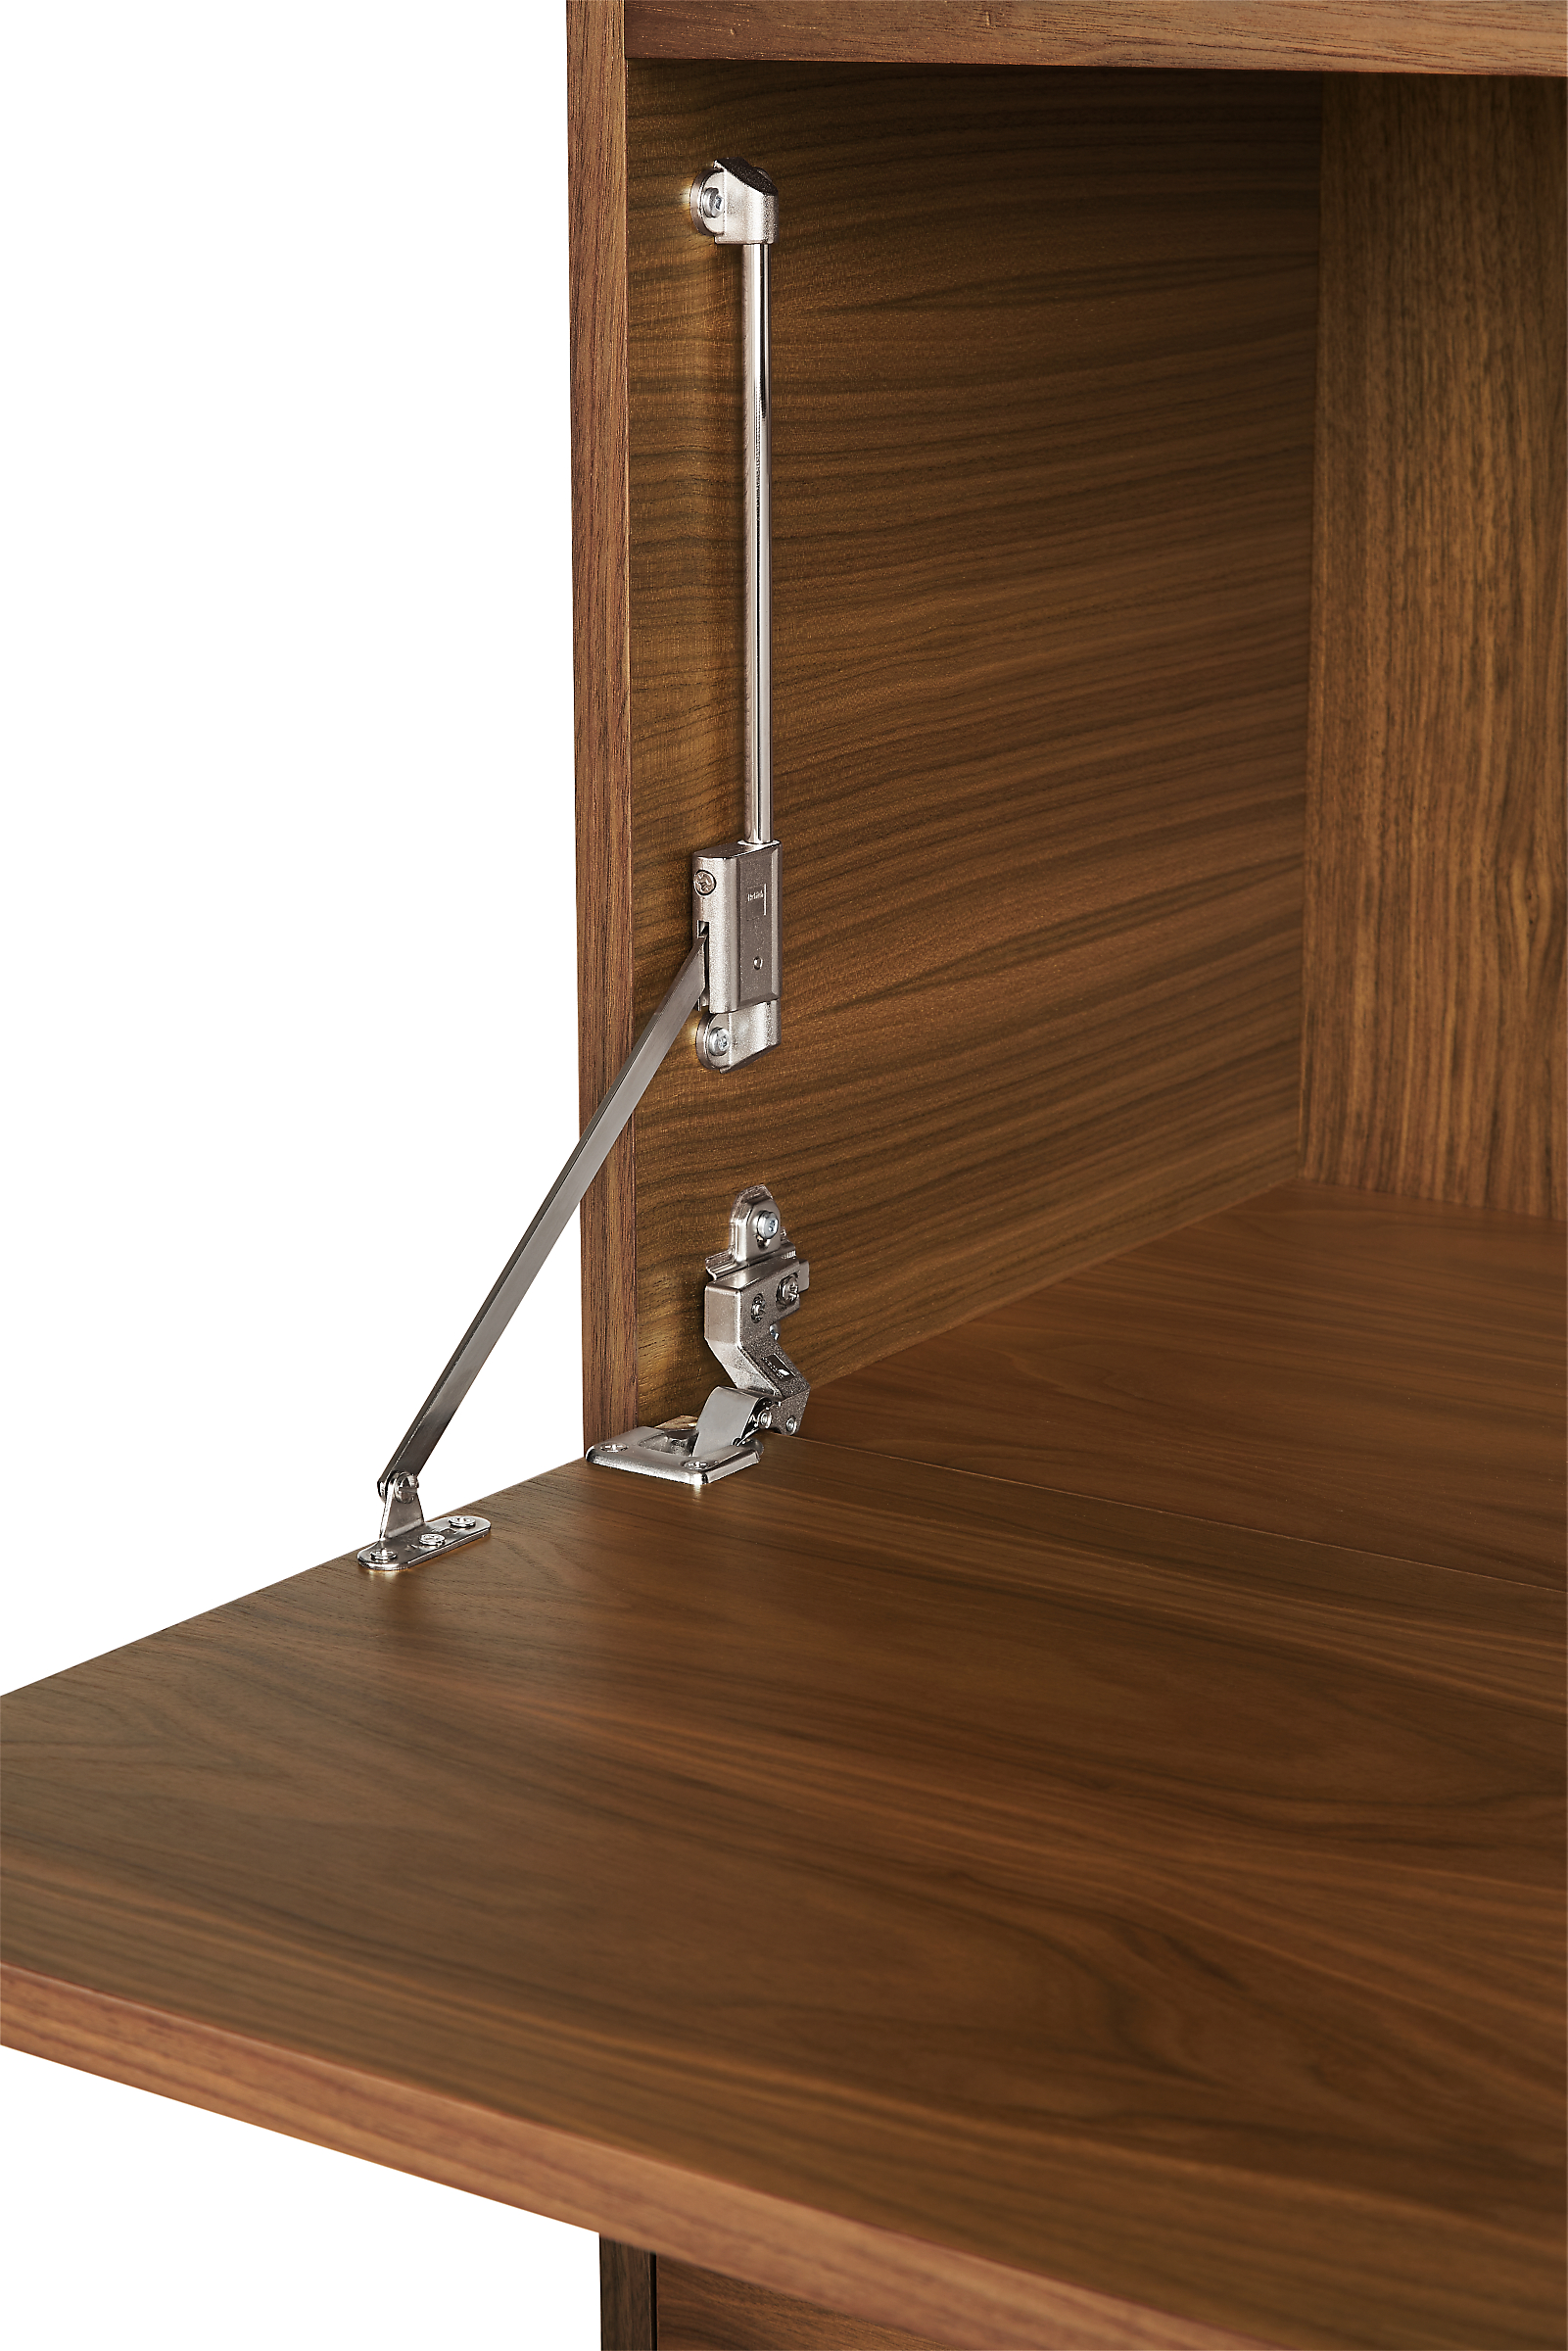 close-up of drop-down surface extension mechanism of Taylor storage cabinet desk.